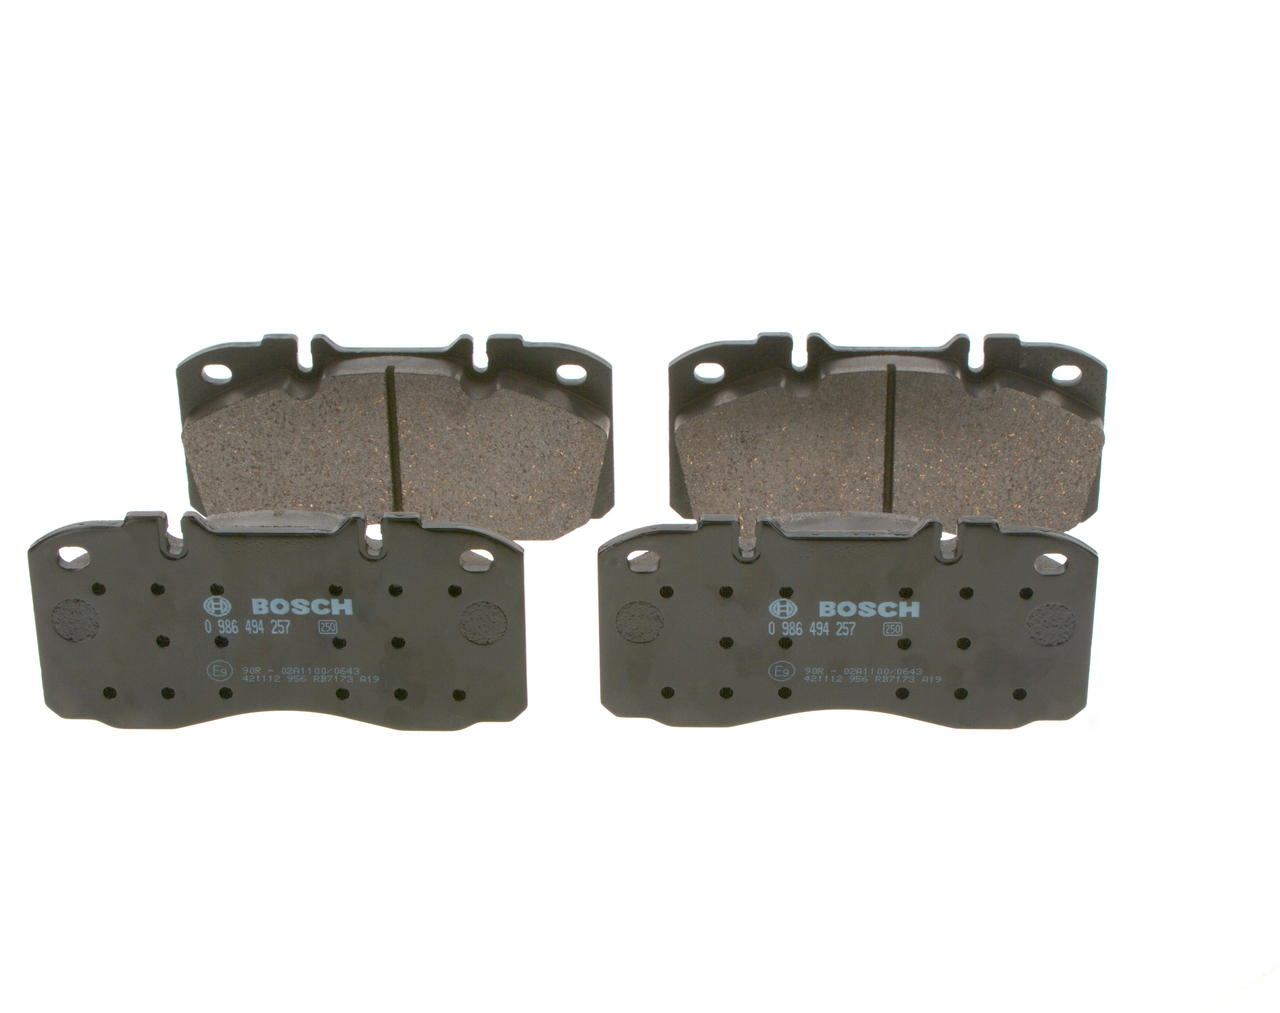 BP1135 BOSCH Low-Metallic, with mounting manual Height: 85,3mm, Width: 175,1mm, Thickness: 22,2mm Brake pads 0 986 494 257 buy